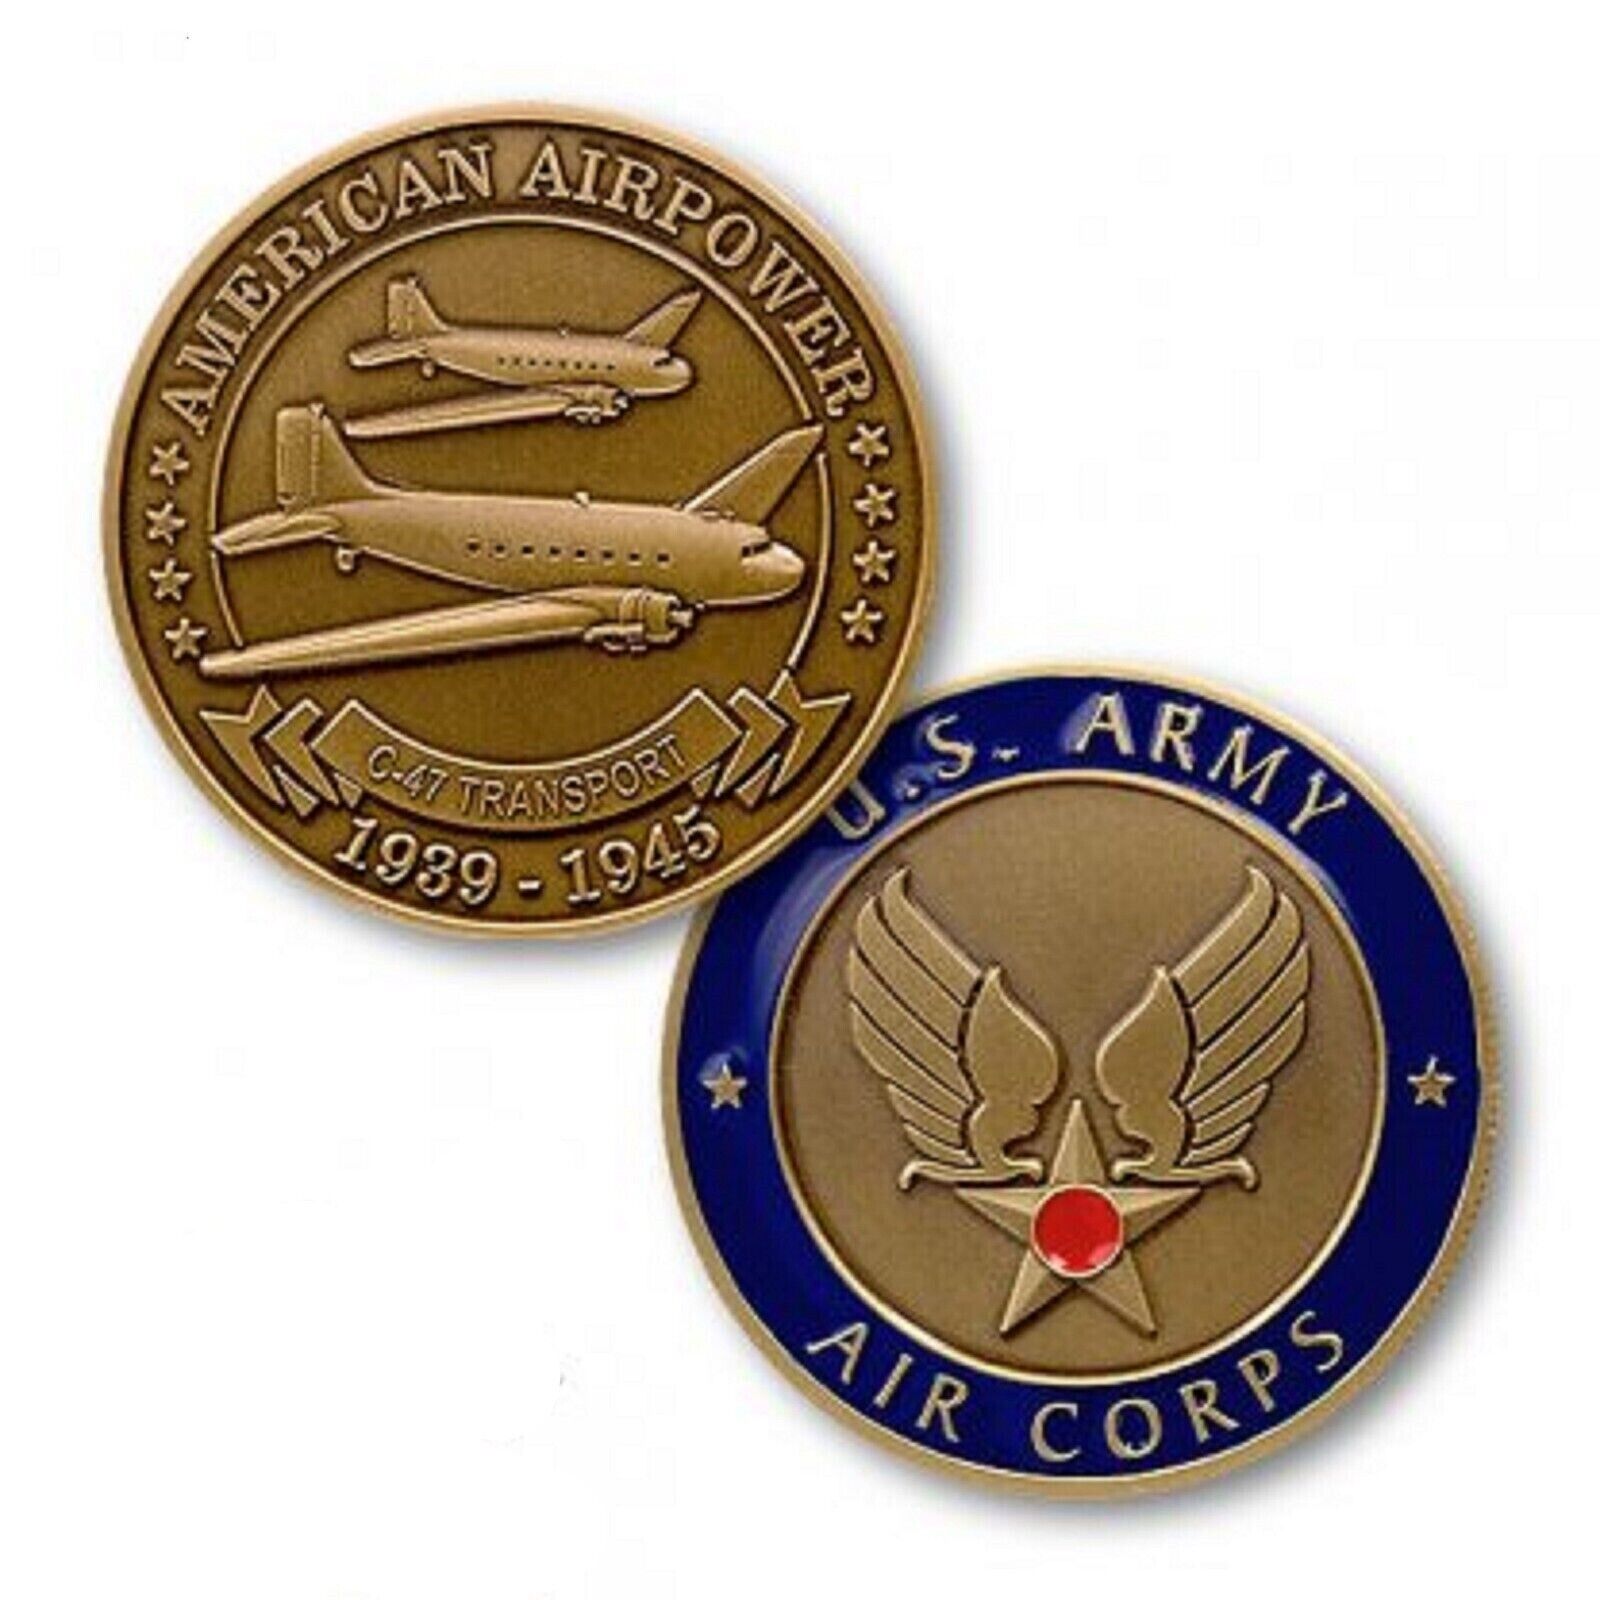 AIR CORPS C-47 TRANSPORT 1939-1945 ARMY CHALLENGE COIN